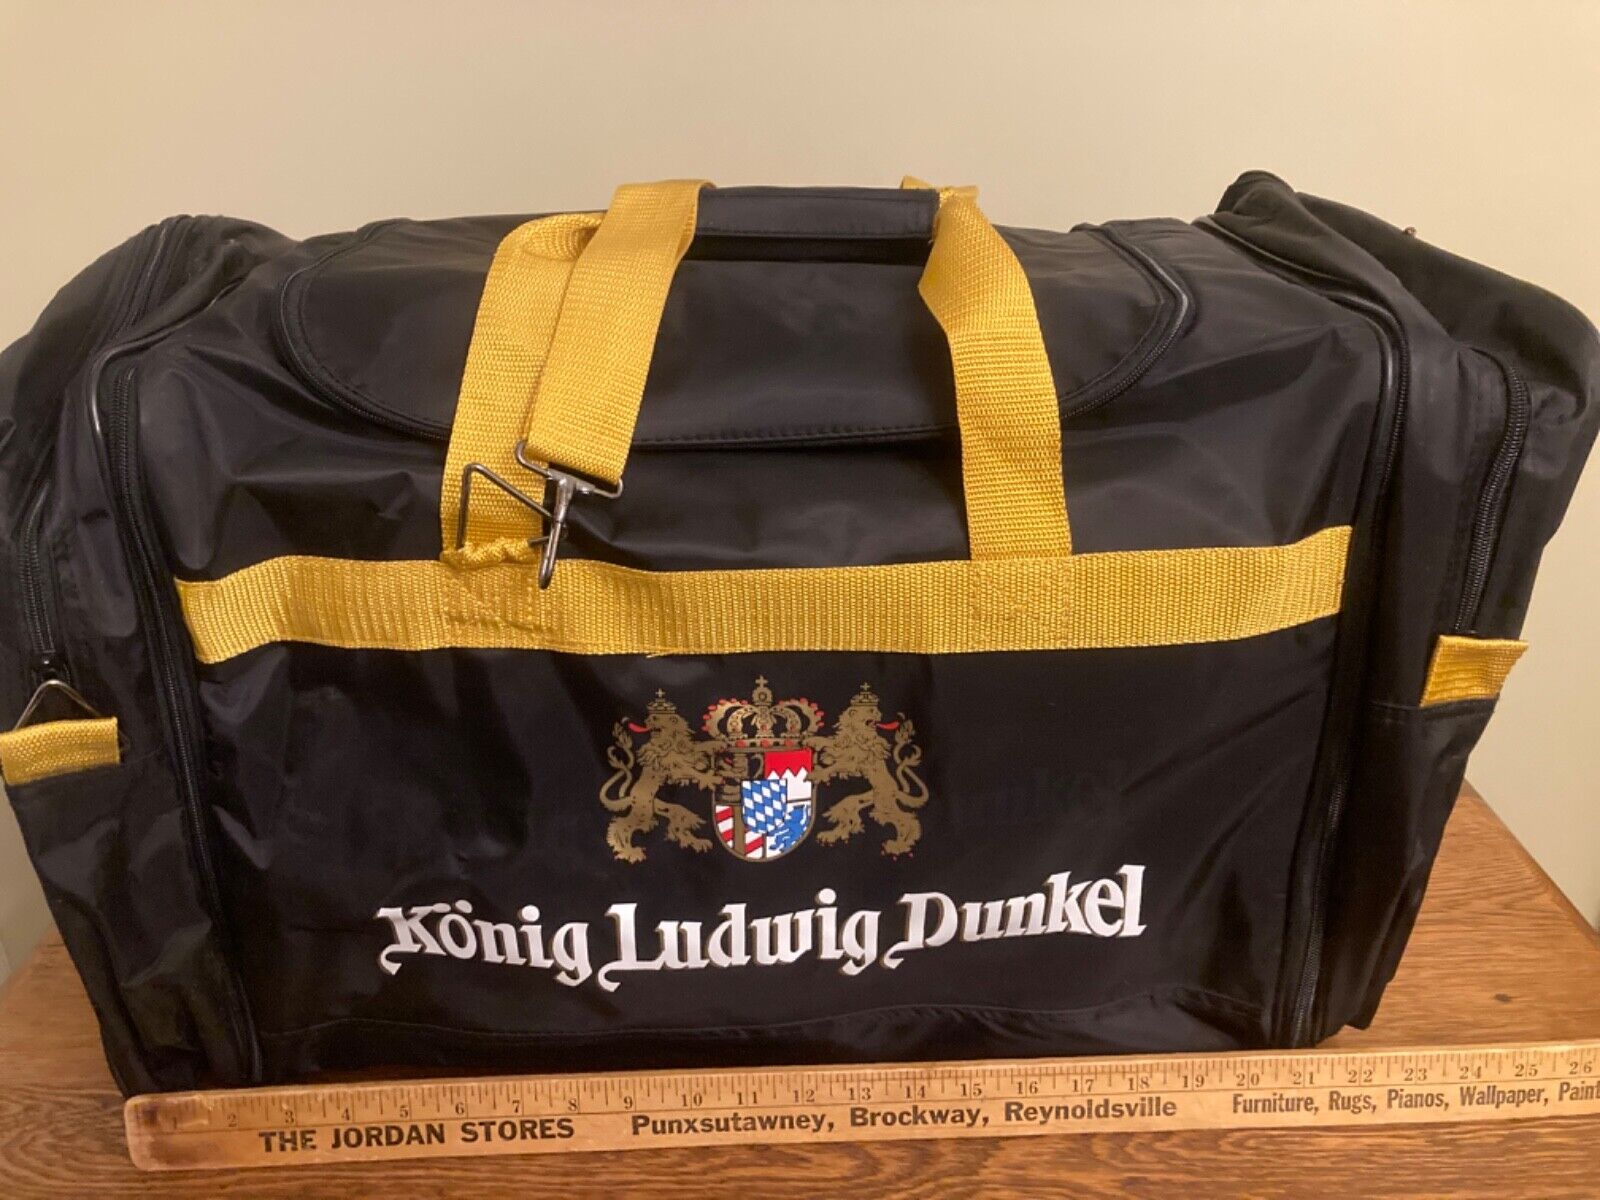 Konig Ludwig Dunkle Beer Germany Large Black Duffle - New No Tags— Perfect